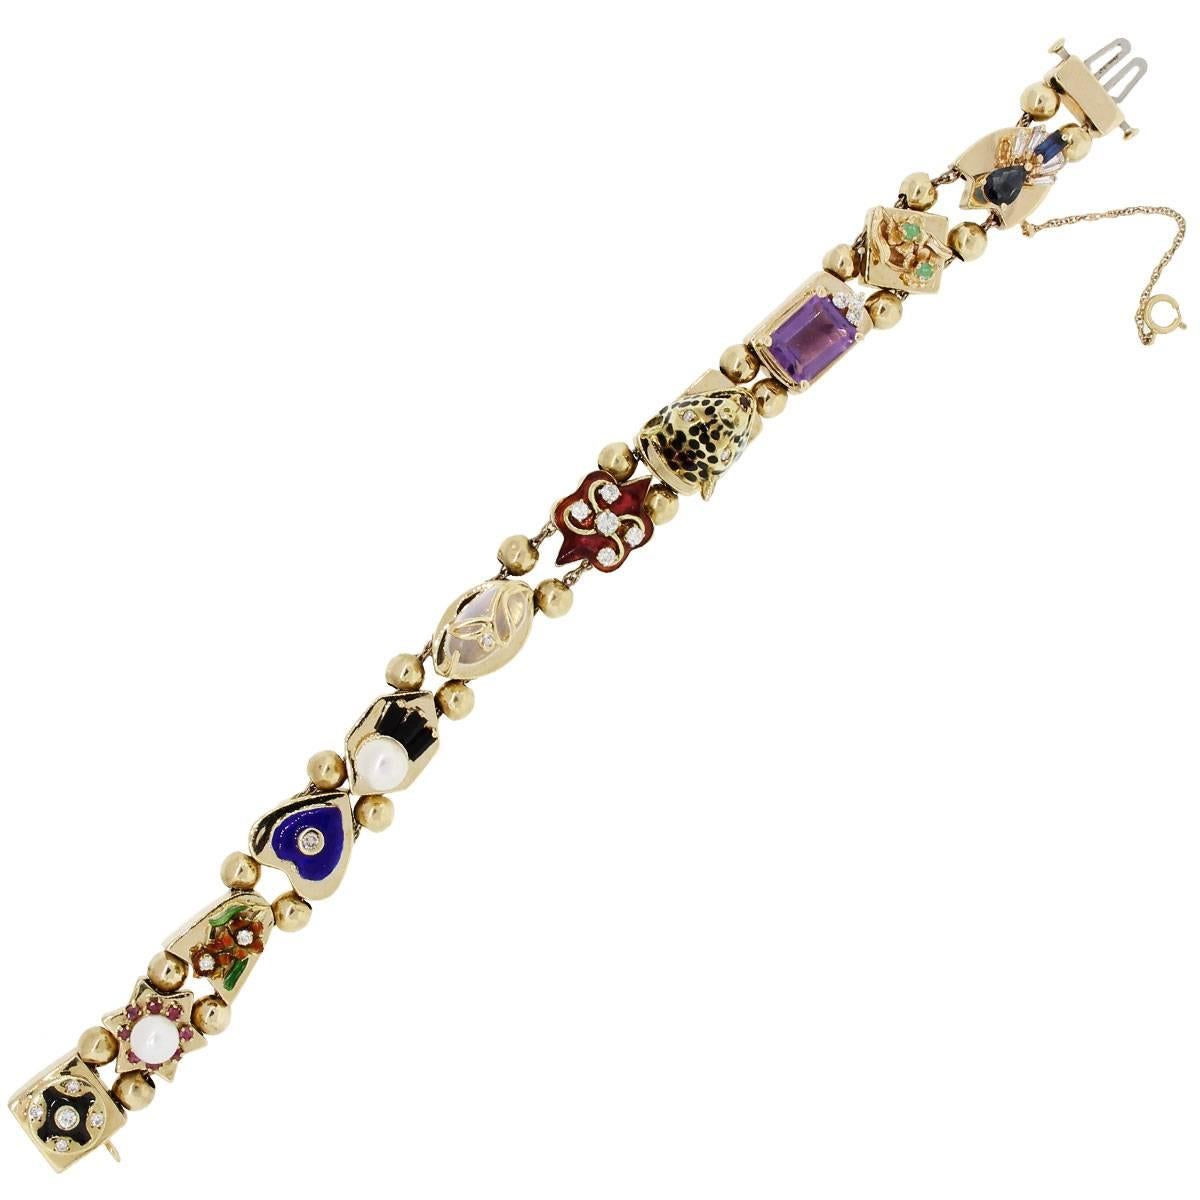 Material: 14k yellow gold
Diamond Details: Approximately 0.68ctw of round brilliant diamonds.
Gemstone Details: Pearl, enamel, onyx, emerald, amethyst, sapphire
Fastening: Double tongue in box clasp with safety chain
Measurements: Will fit a 7″